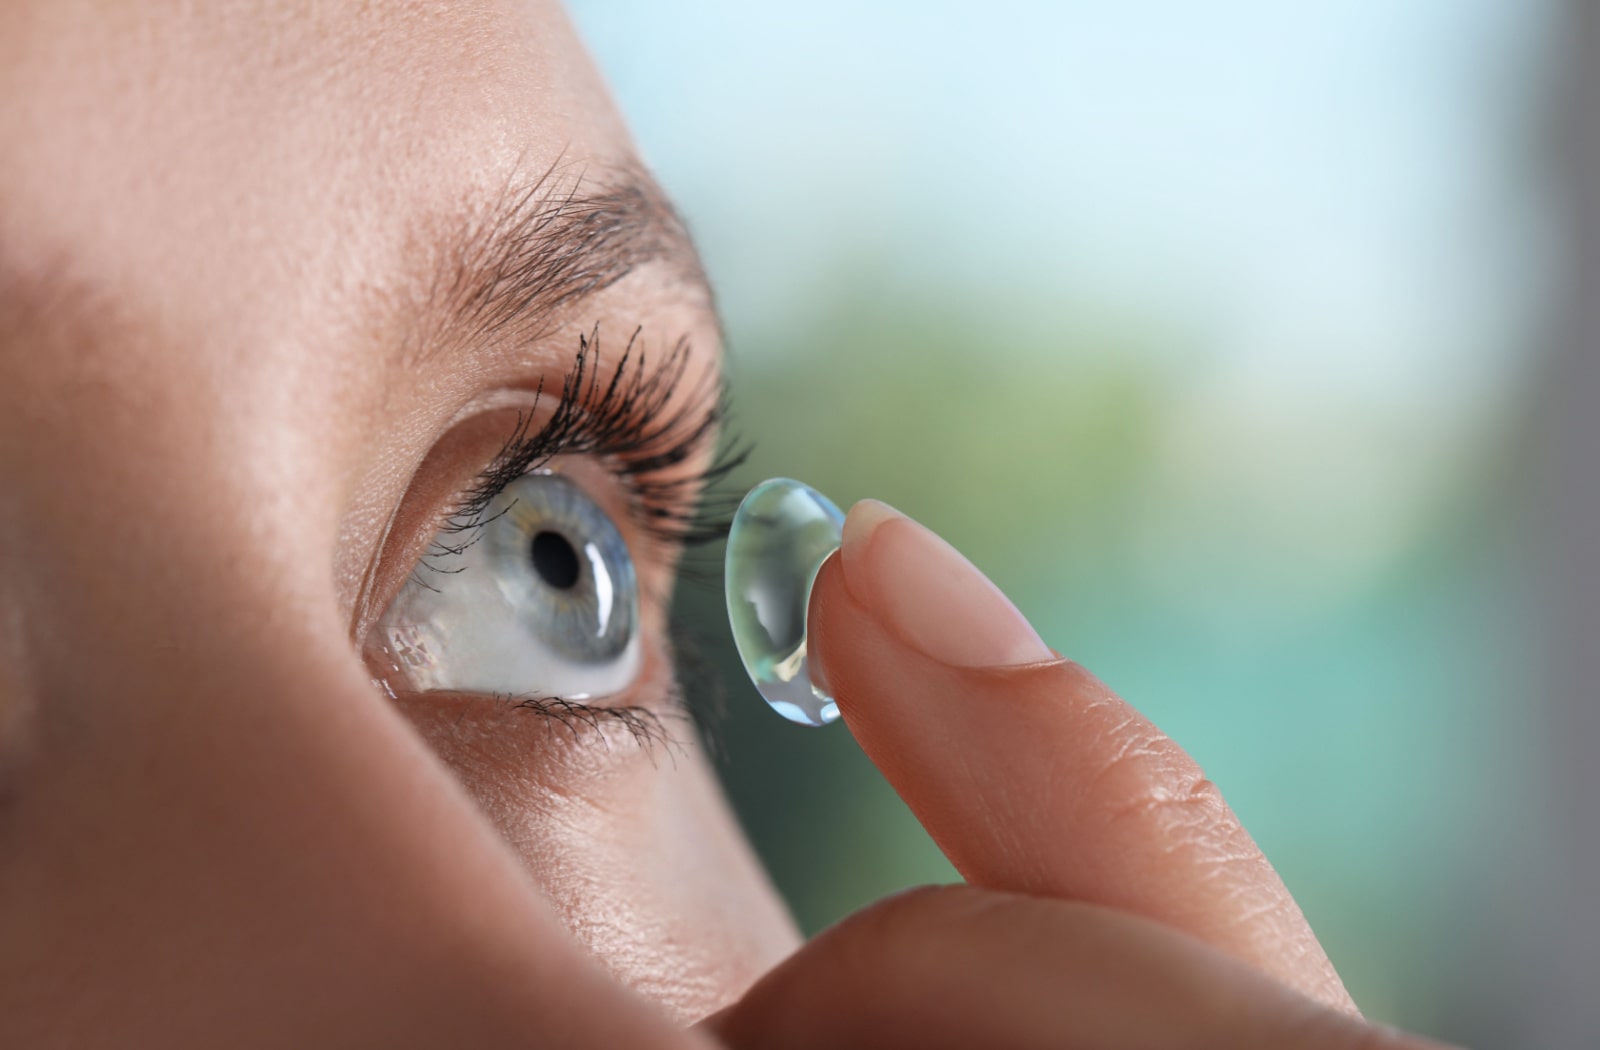 A woman using her index finger to place a contact lens onto her eye